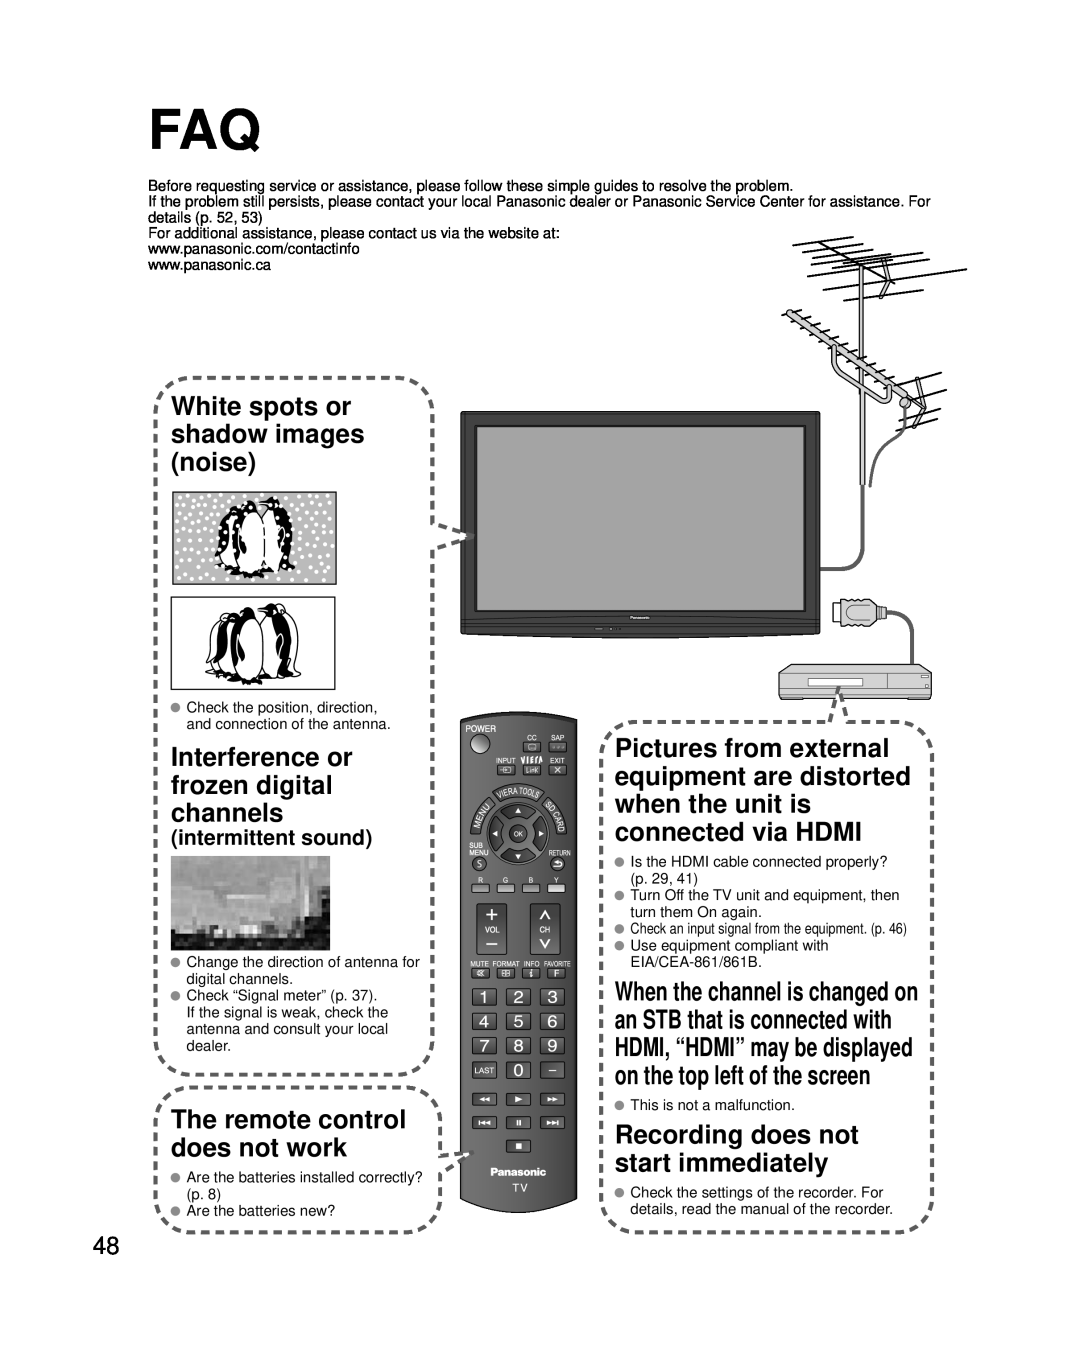 Panasonic TC-P42U2 White spots or shadow images noise, Interference or frozen digital channels, intermittent sound 